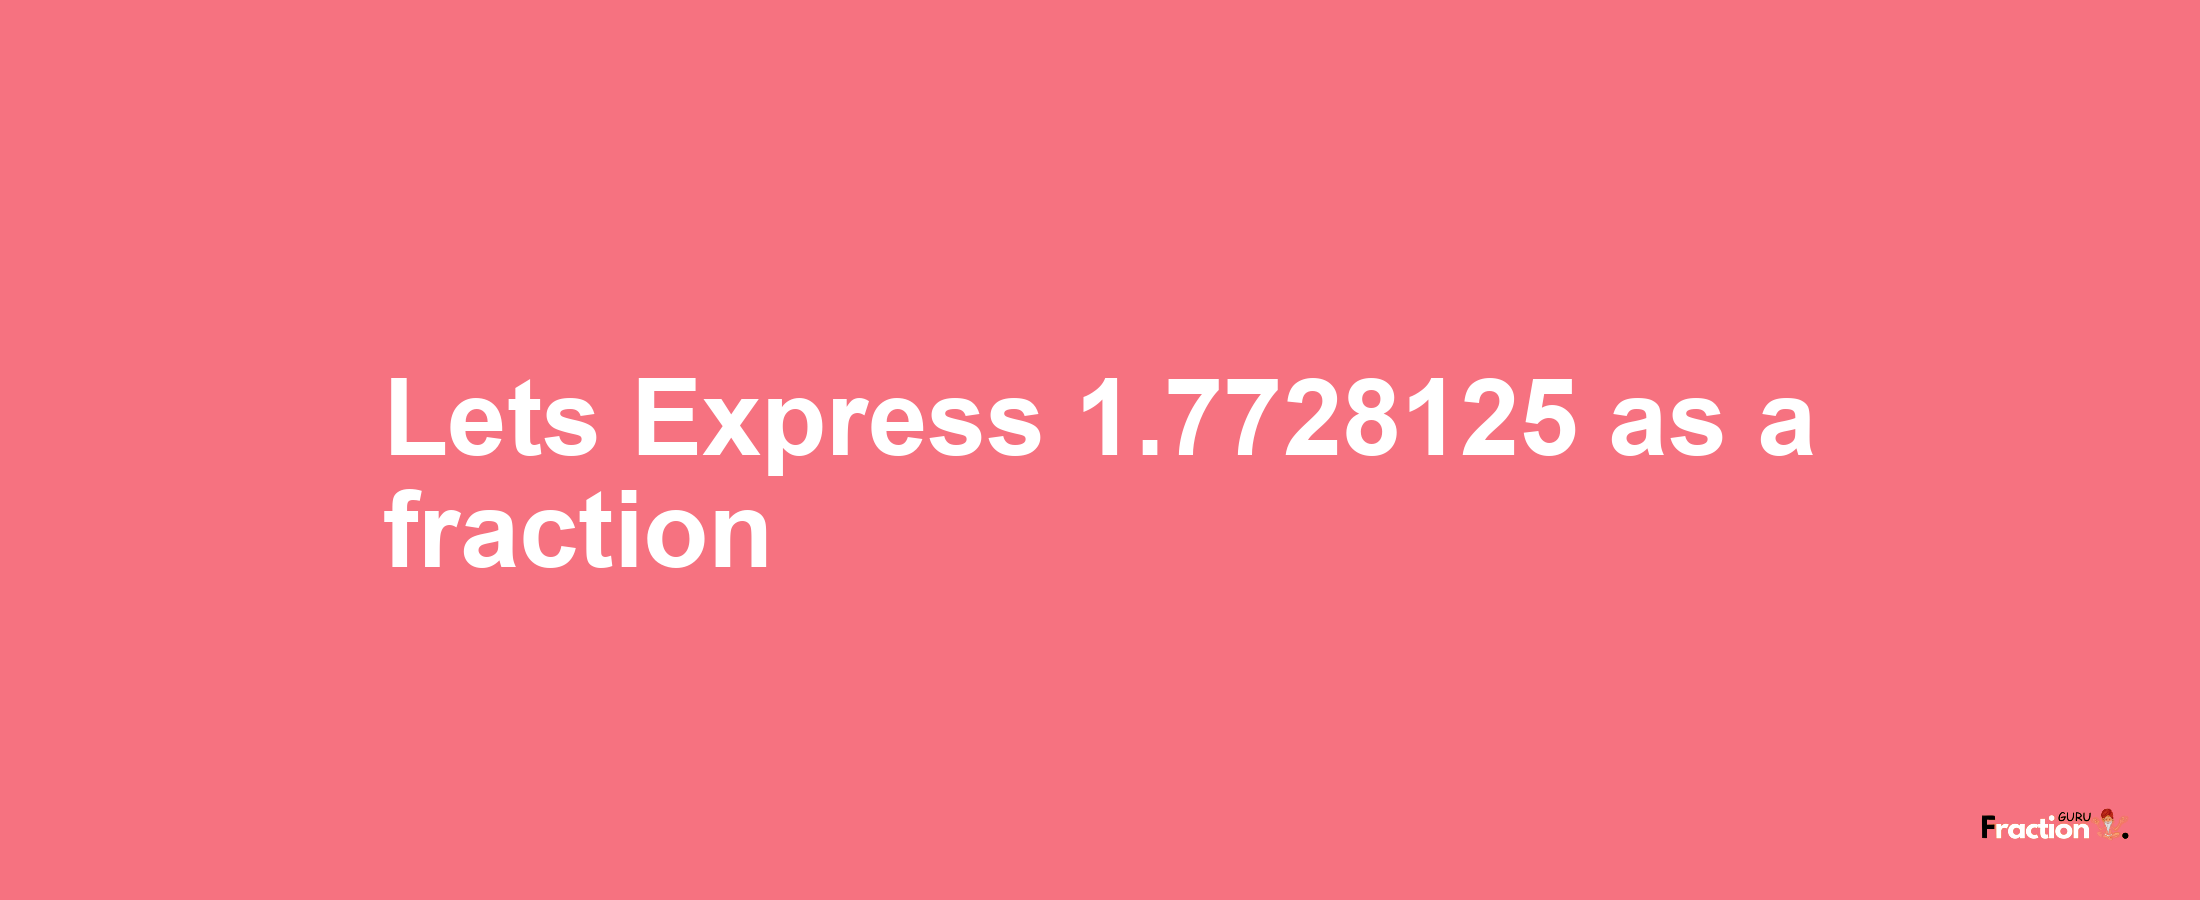 Lets Express 1.7728125 as afraction